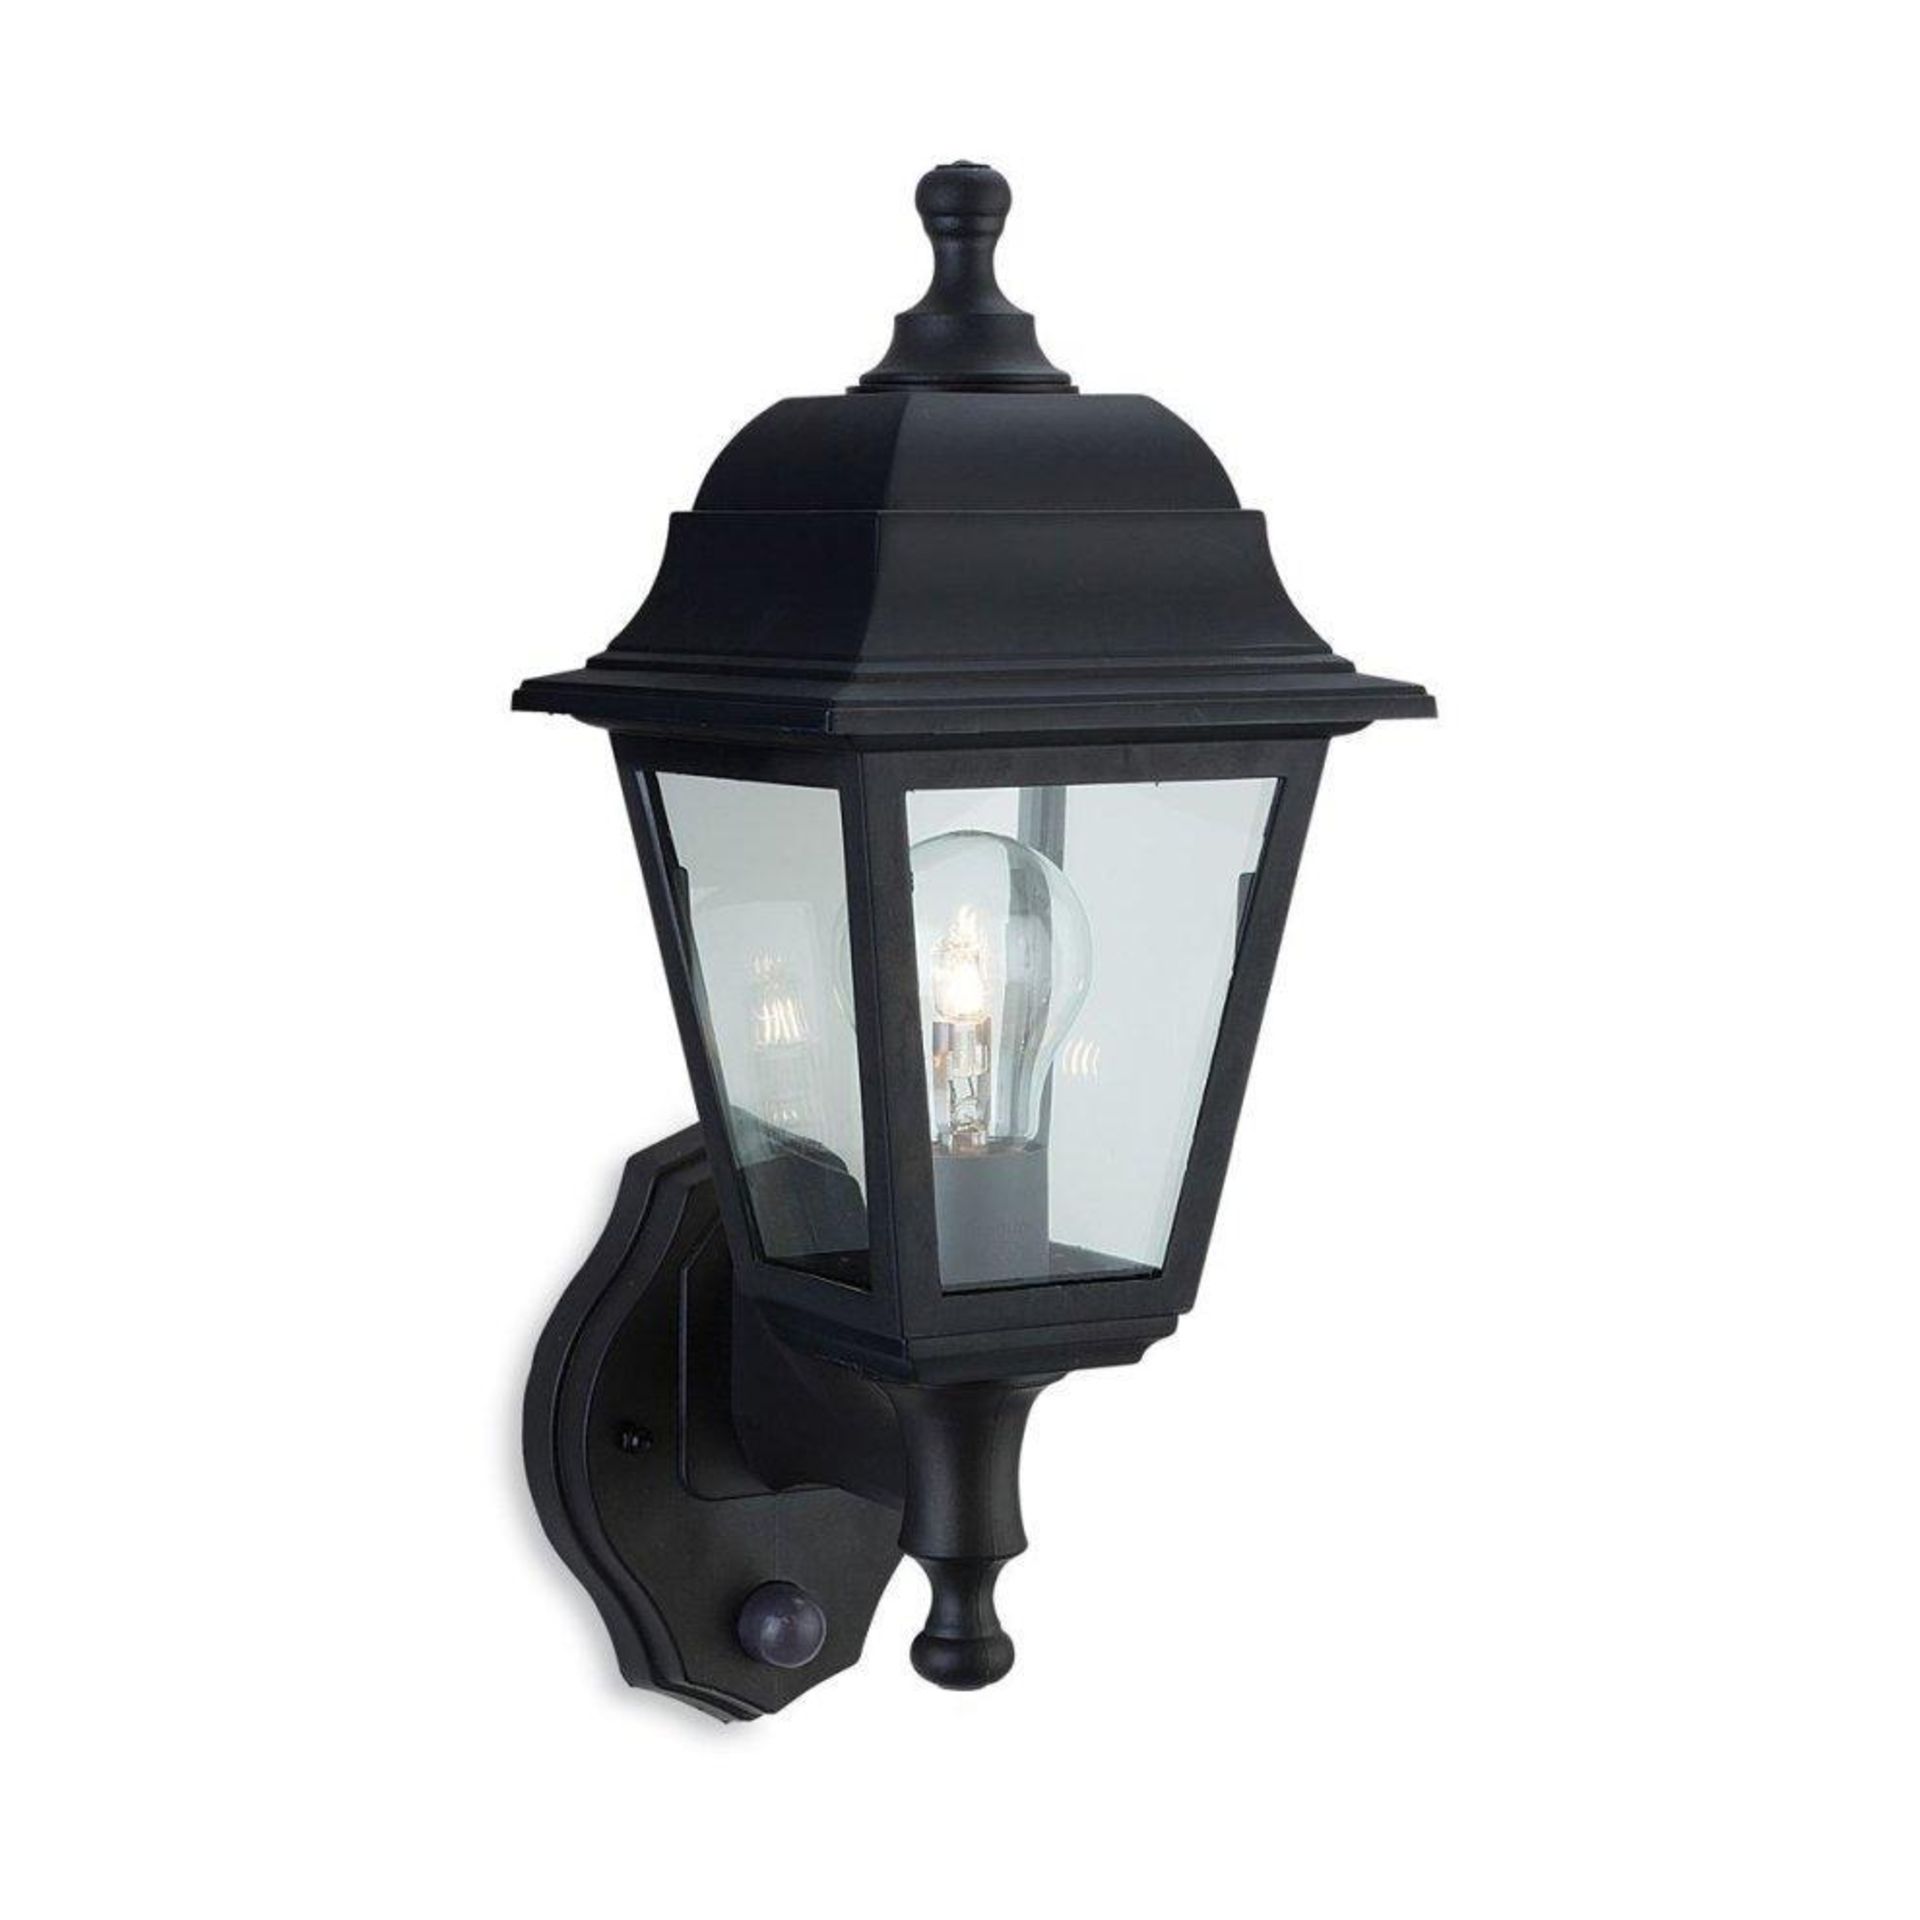 Oslo 1 Light Outdoor Wall Lantern Uplight with Pir Black Resin IP44 E27 - ER47. Welcome guests to